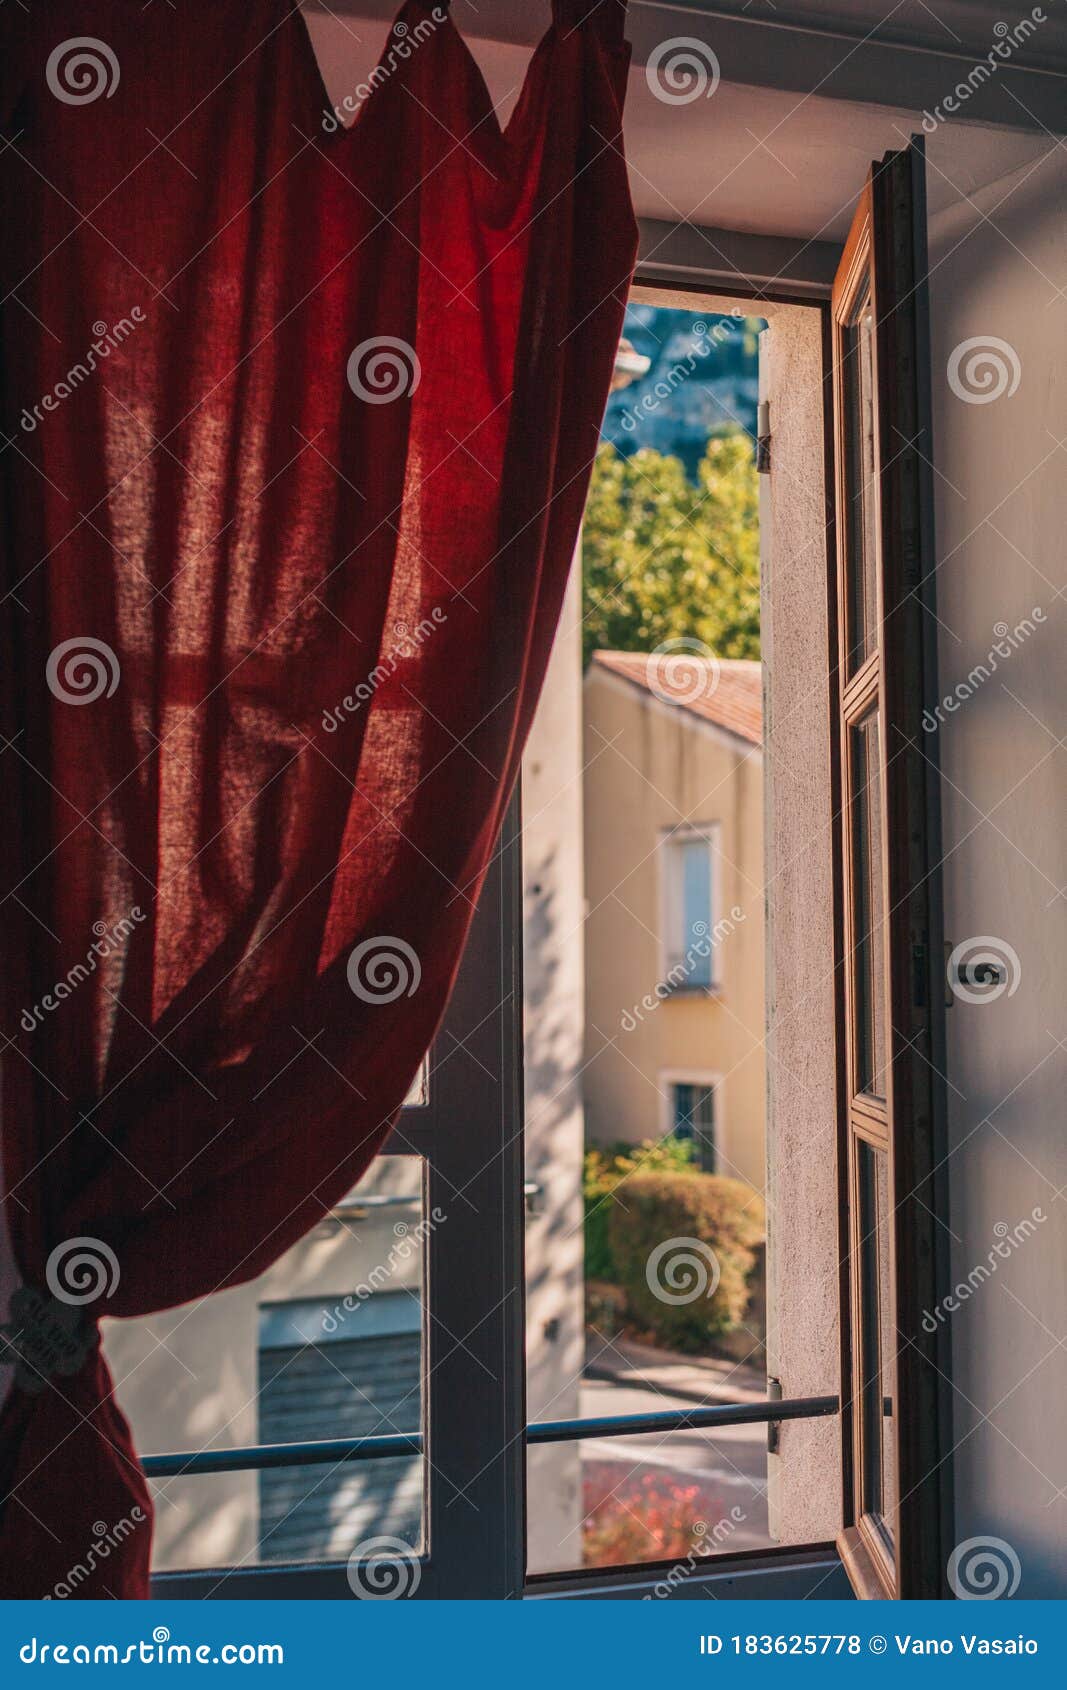 Early Sunny Morning, The Red Curtain Is Pushed Aside To Let In Bright ... Open Window At Morning